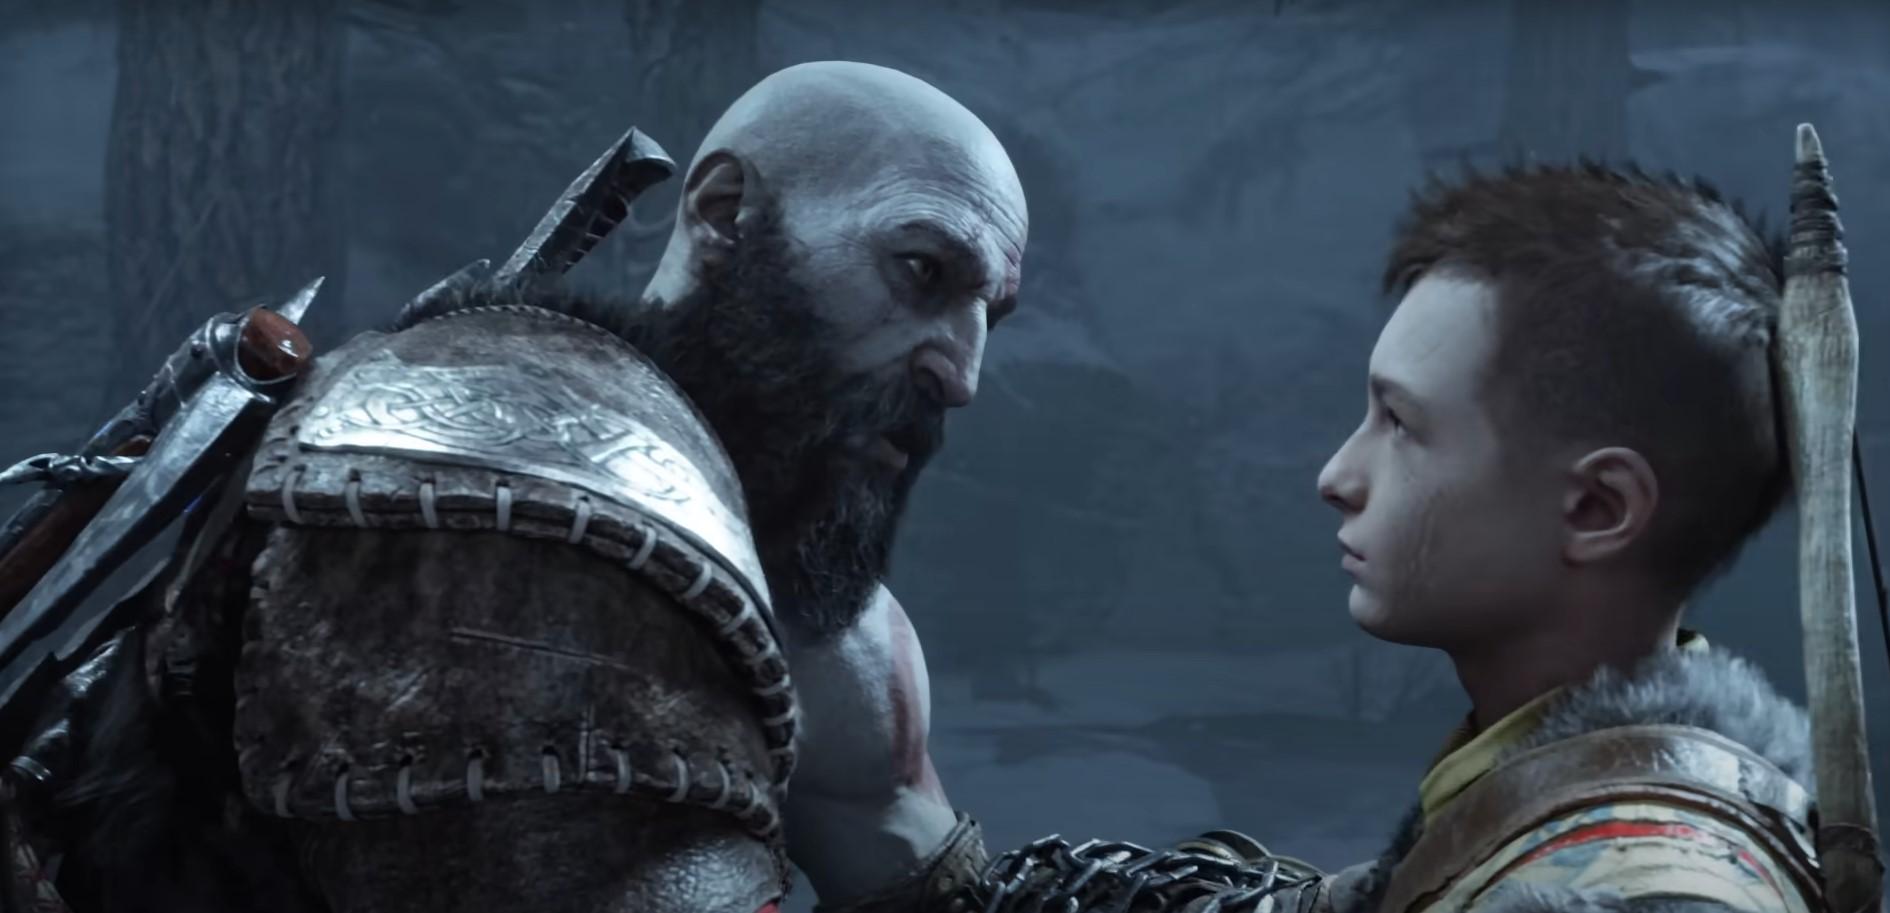 Will 'God of War: Ragnarok' Be Available on PC?